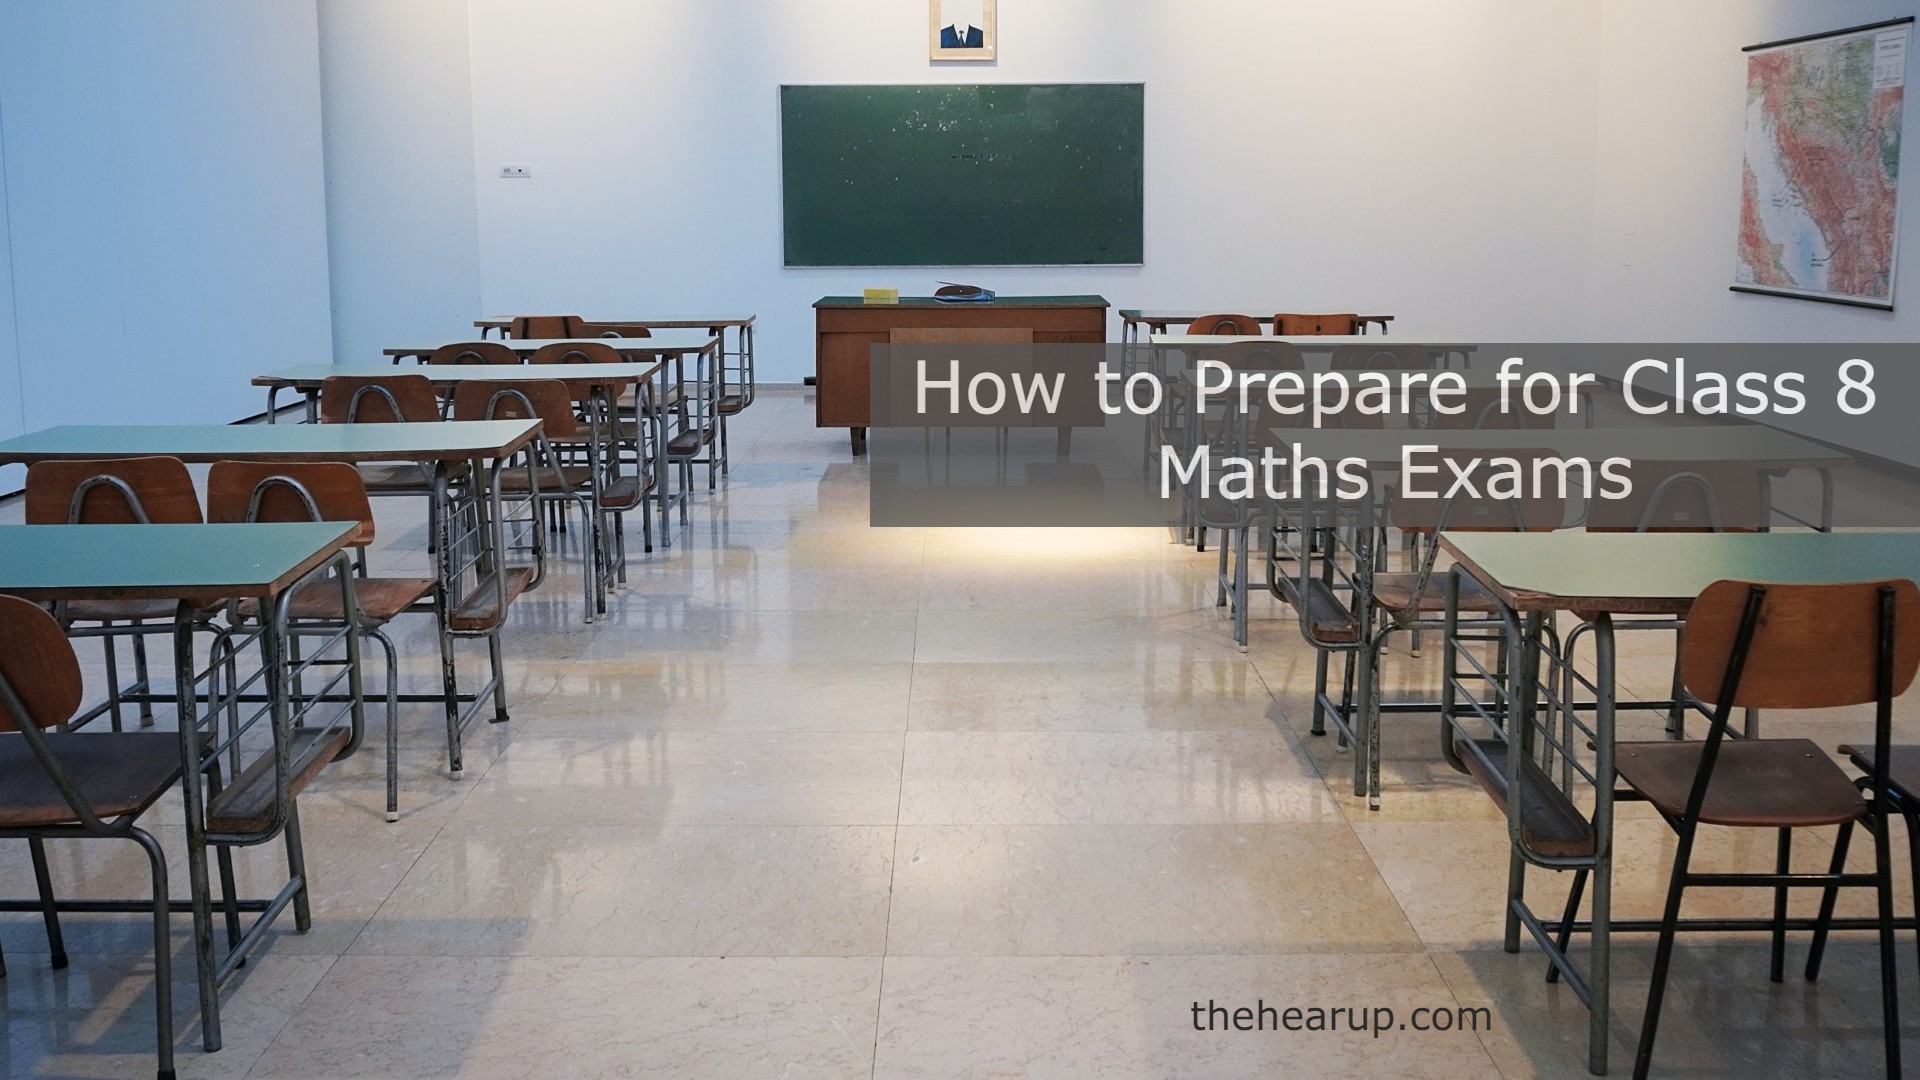 How to Prepare for Class 8 Maths Exams from NCERT Maths Book?